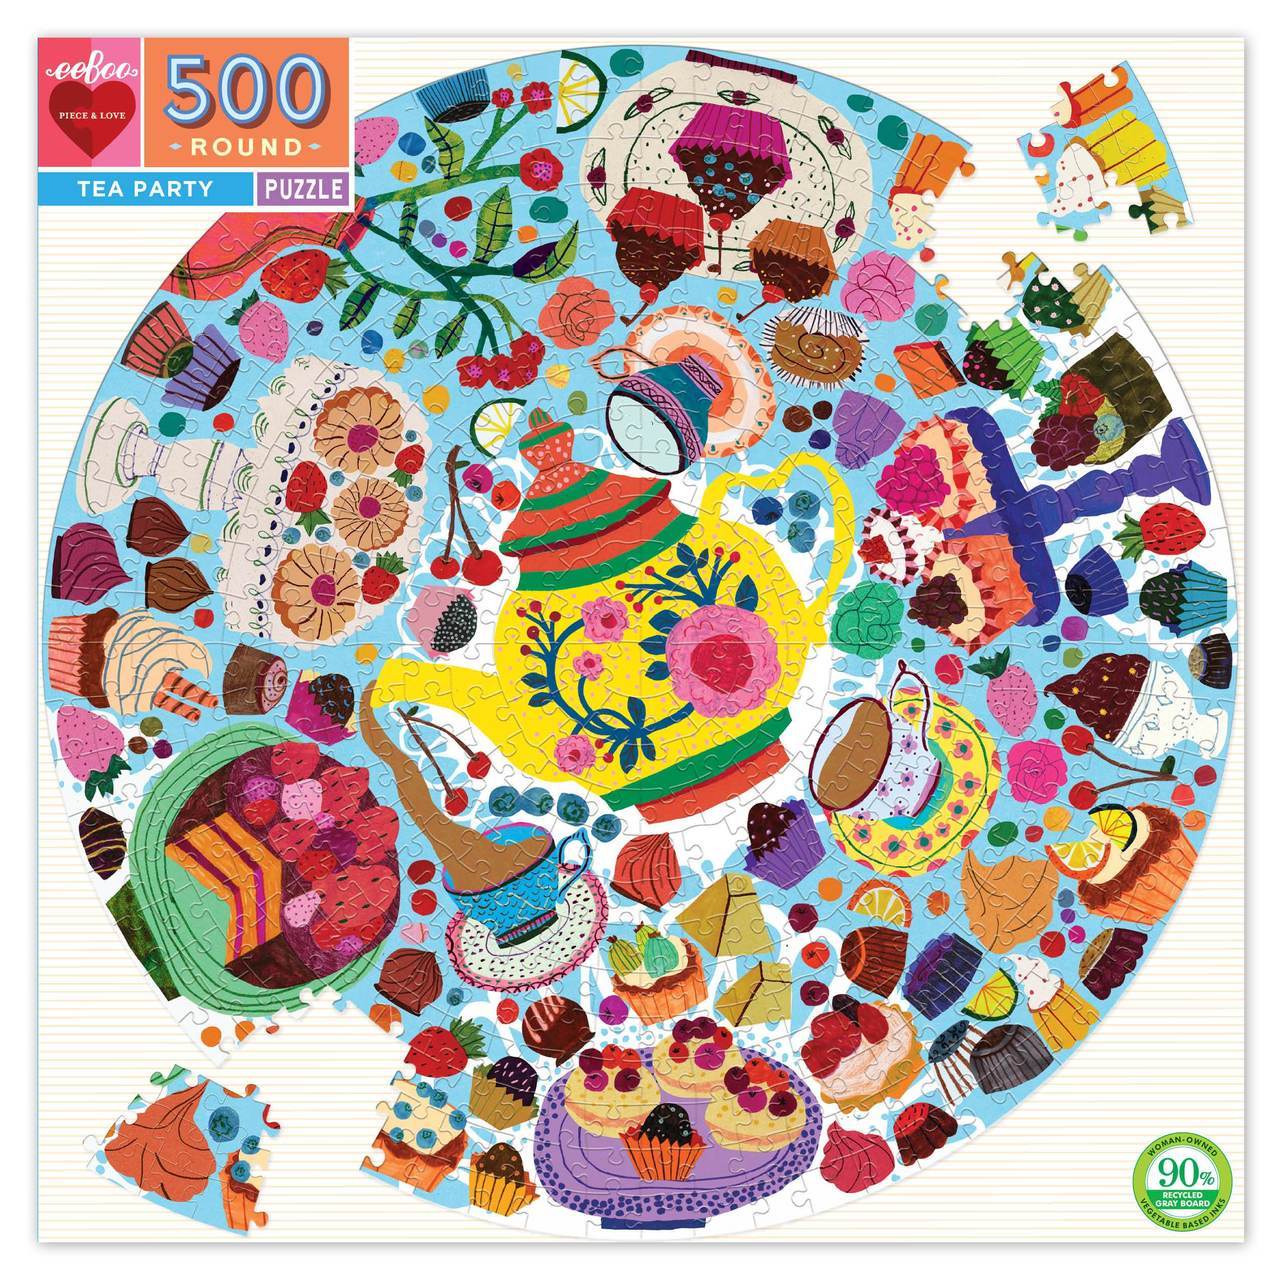 Circular blue puzzle filled with tea party motifs such as a tea pot, various pastries, and teacups.